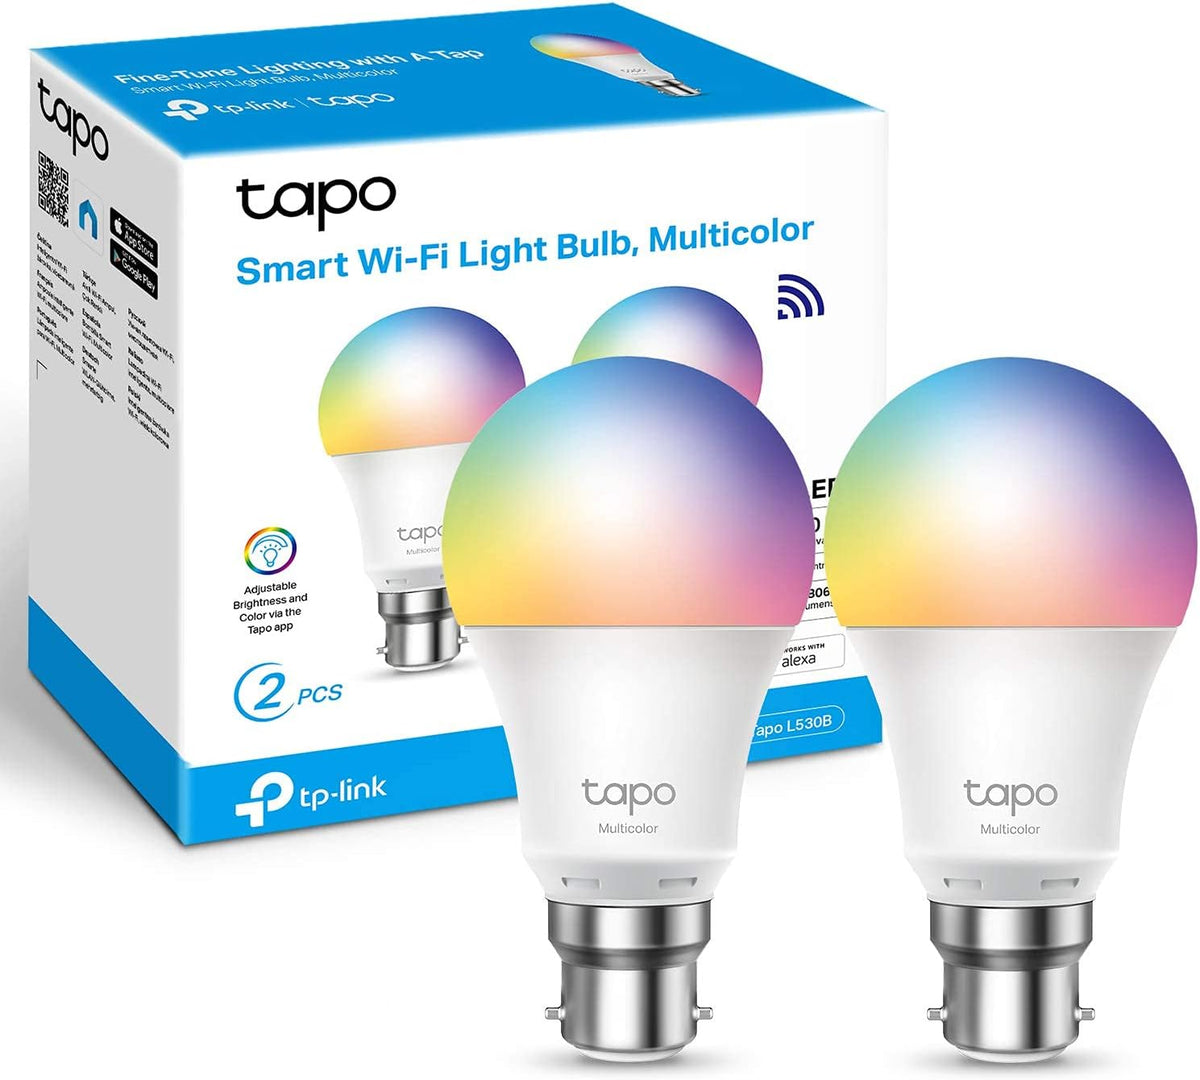 Smart Bulb, Smart Wi-Fi LED Light, B22, 60W, Energy saving, Works with Amazon Alexa and Google Home, Colour-Changeable, No Hub Required Tapo L530B(2-pack)[Energy Class F], Multicolor